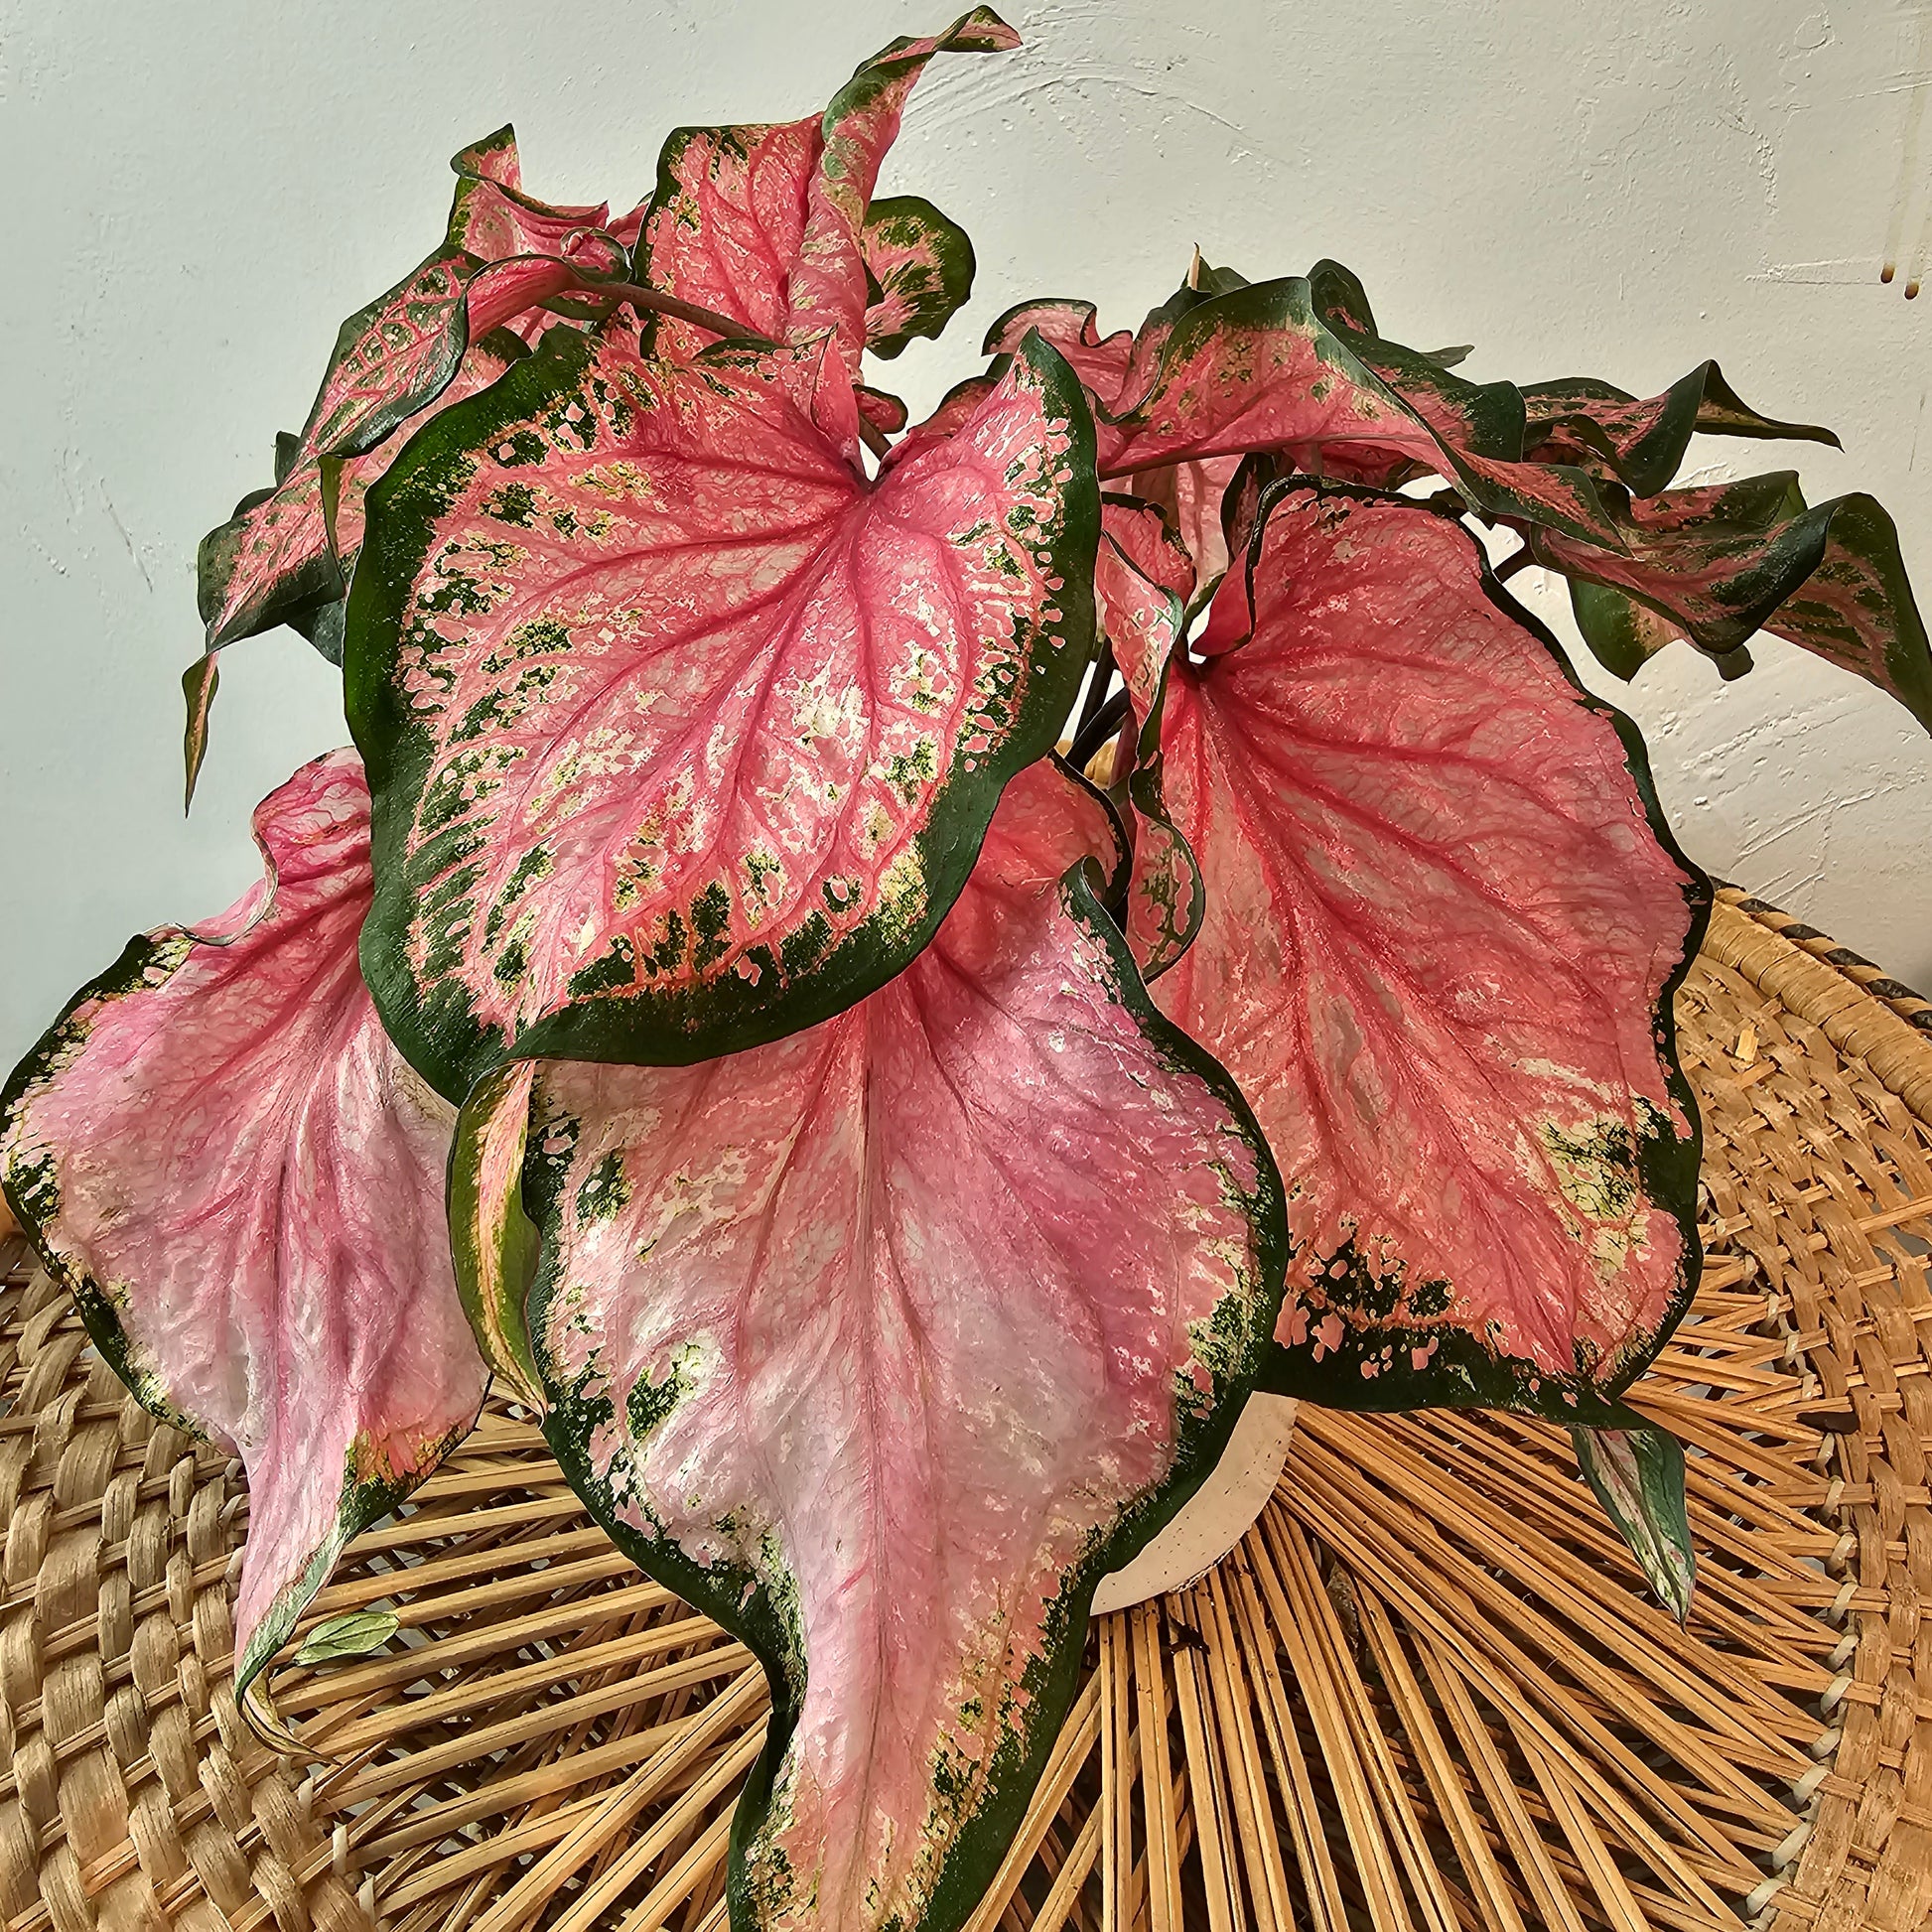 Va Va Violet Caladium (Caladium 'Va Va Violet) in a 6 inch pot. Indoor plant for sale by Promise Supply for delivery and pickup in Toronto